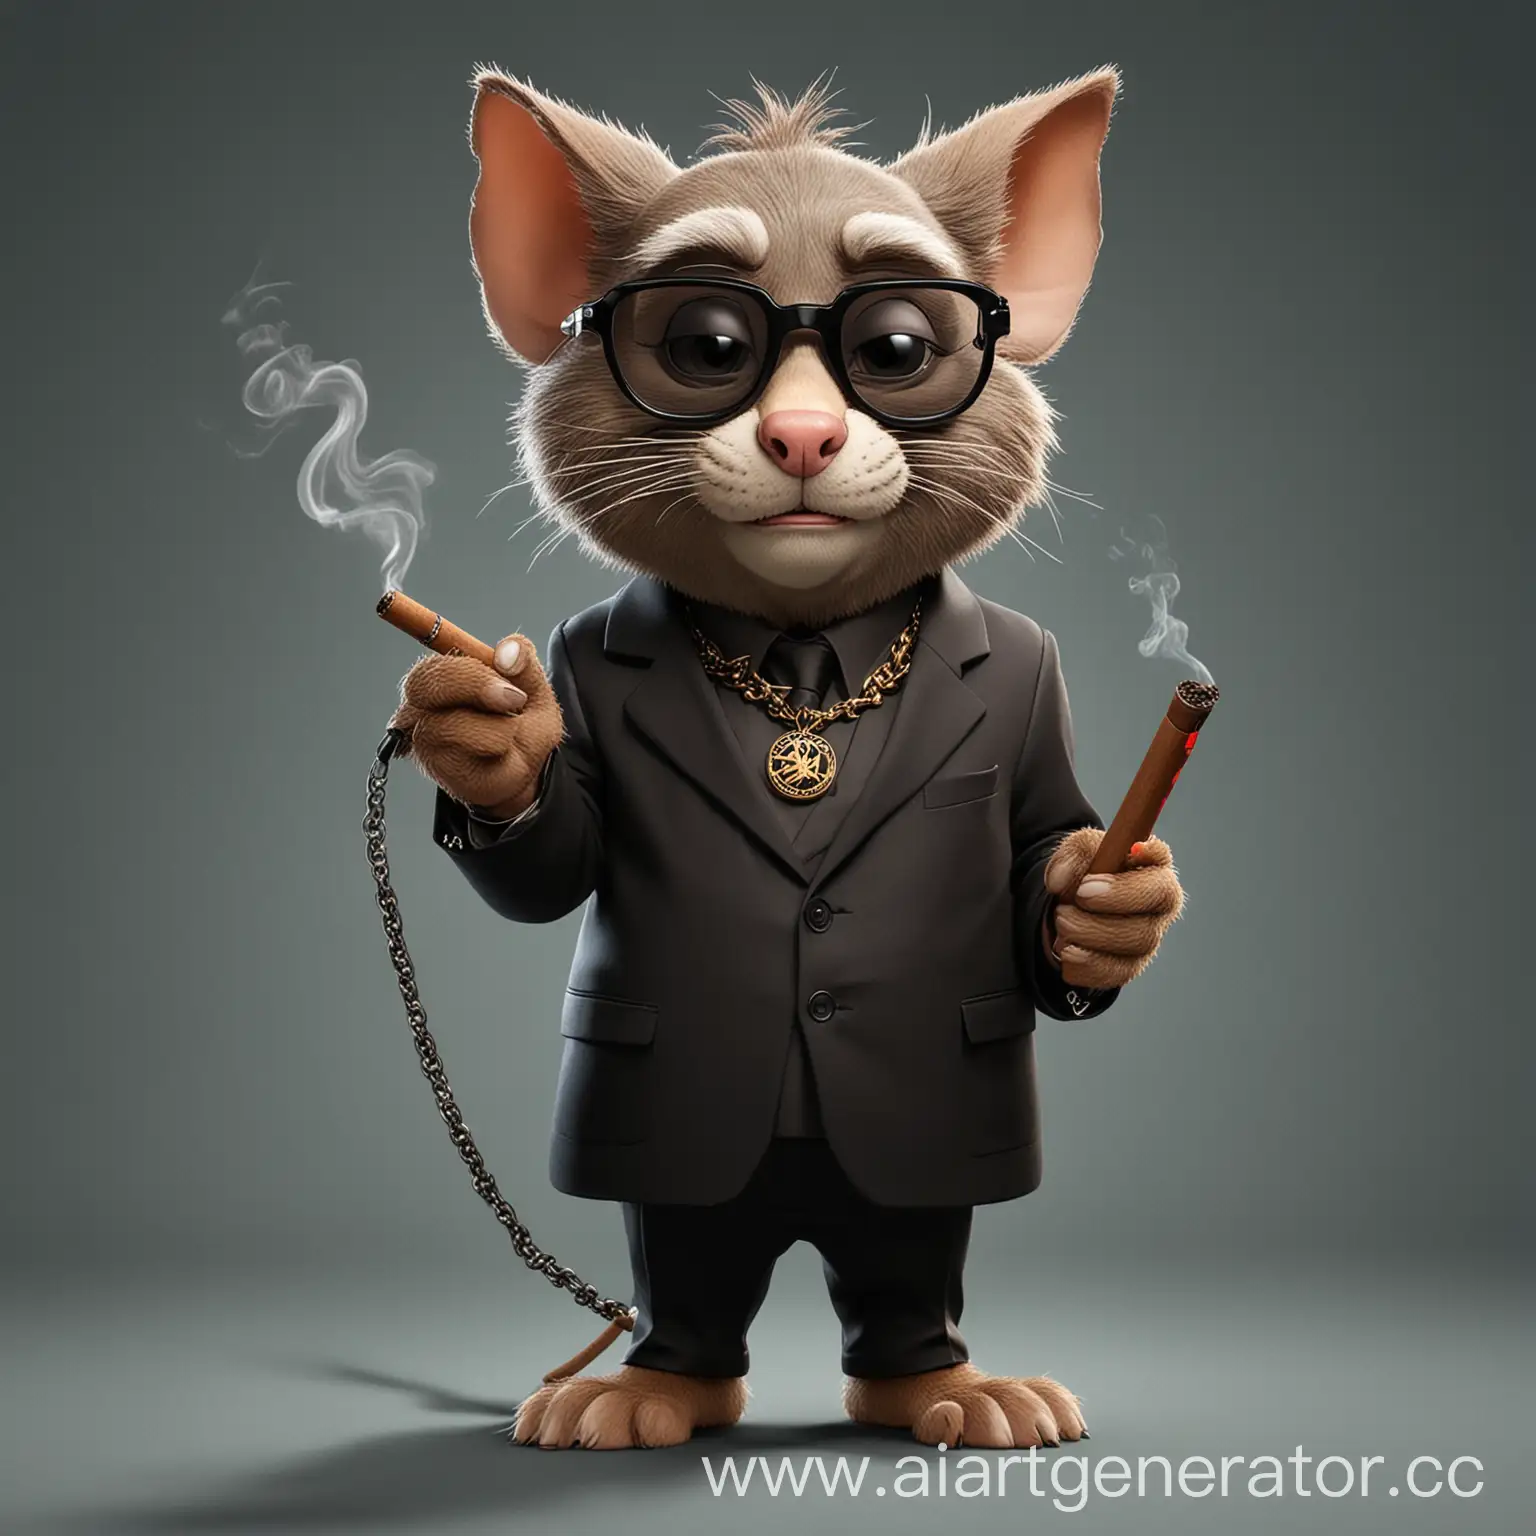 Gerry-from-Tom-and-Jerry-in-Sleek-Black-Suit-with-Cigar